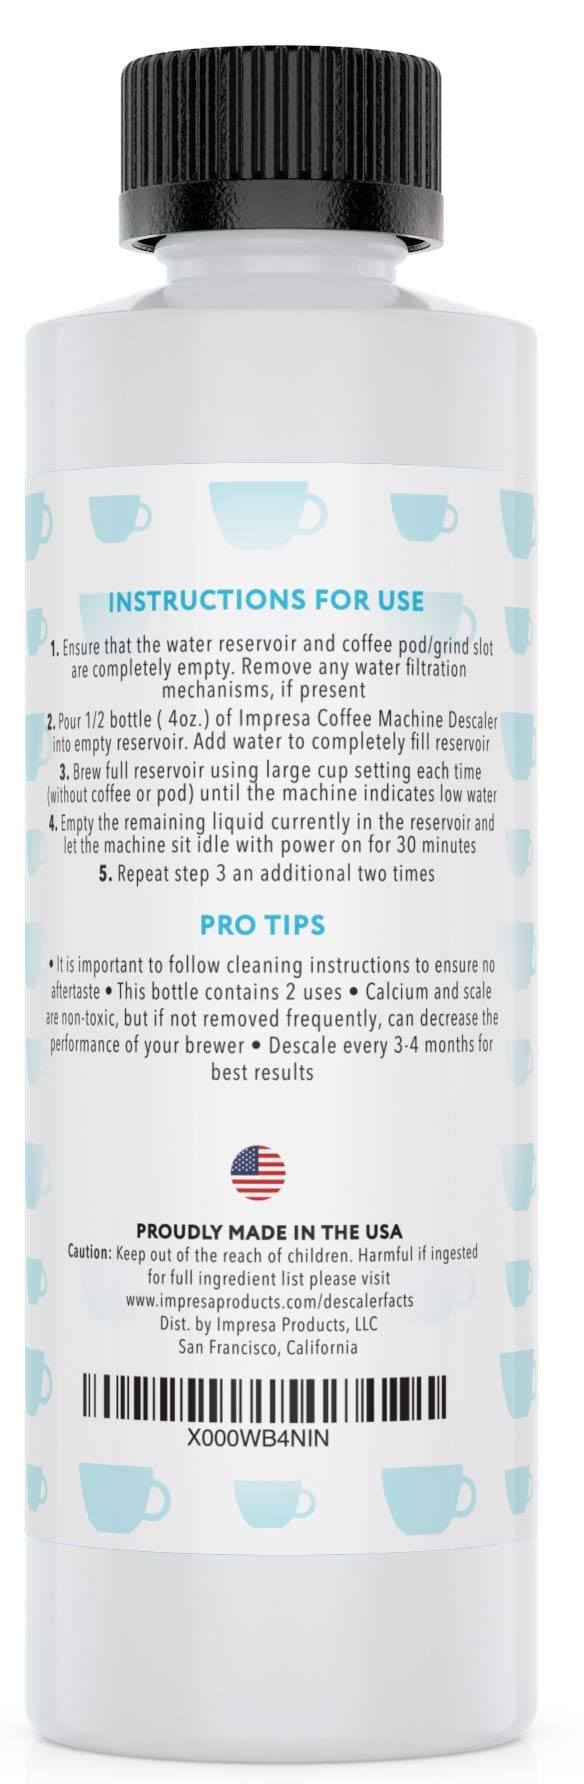 Descaler (2 Pack, 2 Uses Per Bottle) - Made in the USA - Universal Descaling Solution for Keurig, Nespresso, Delonghi and All Single Use Coffee and Espresso Machines